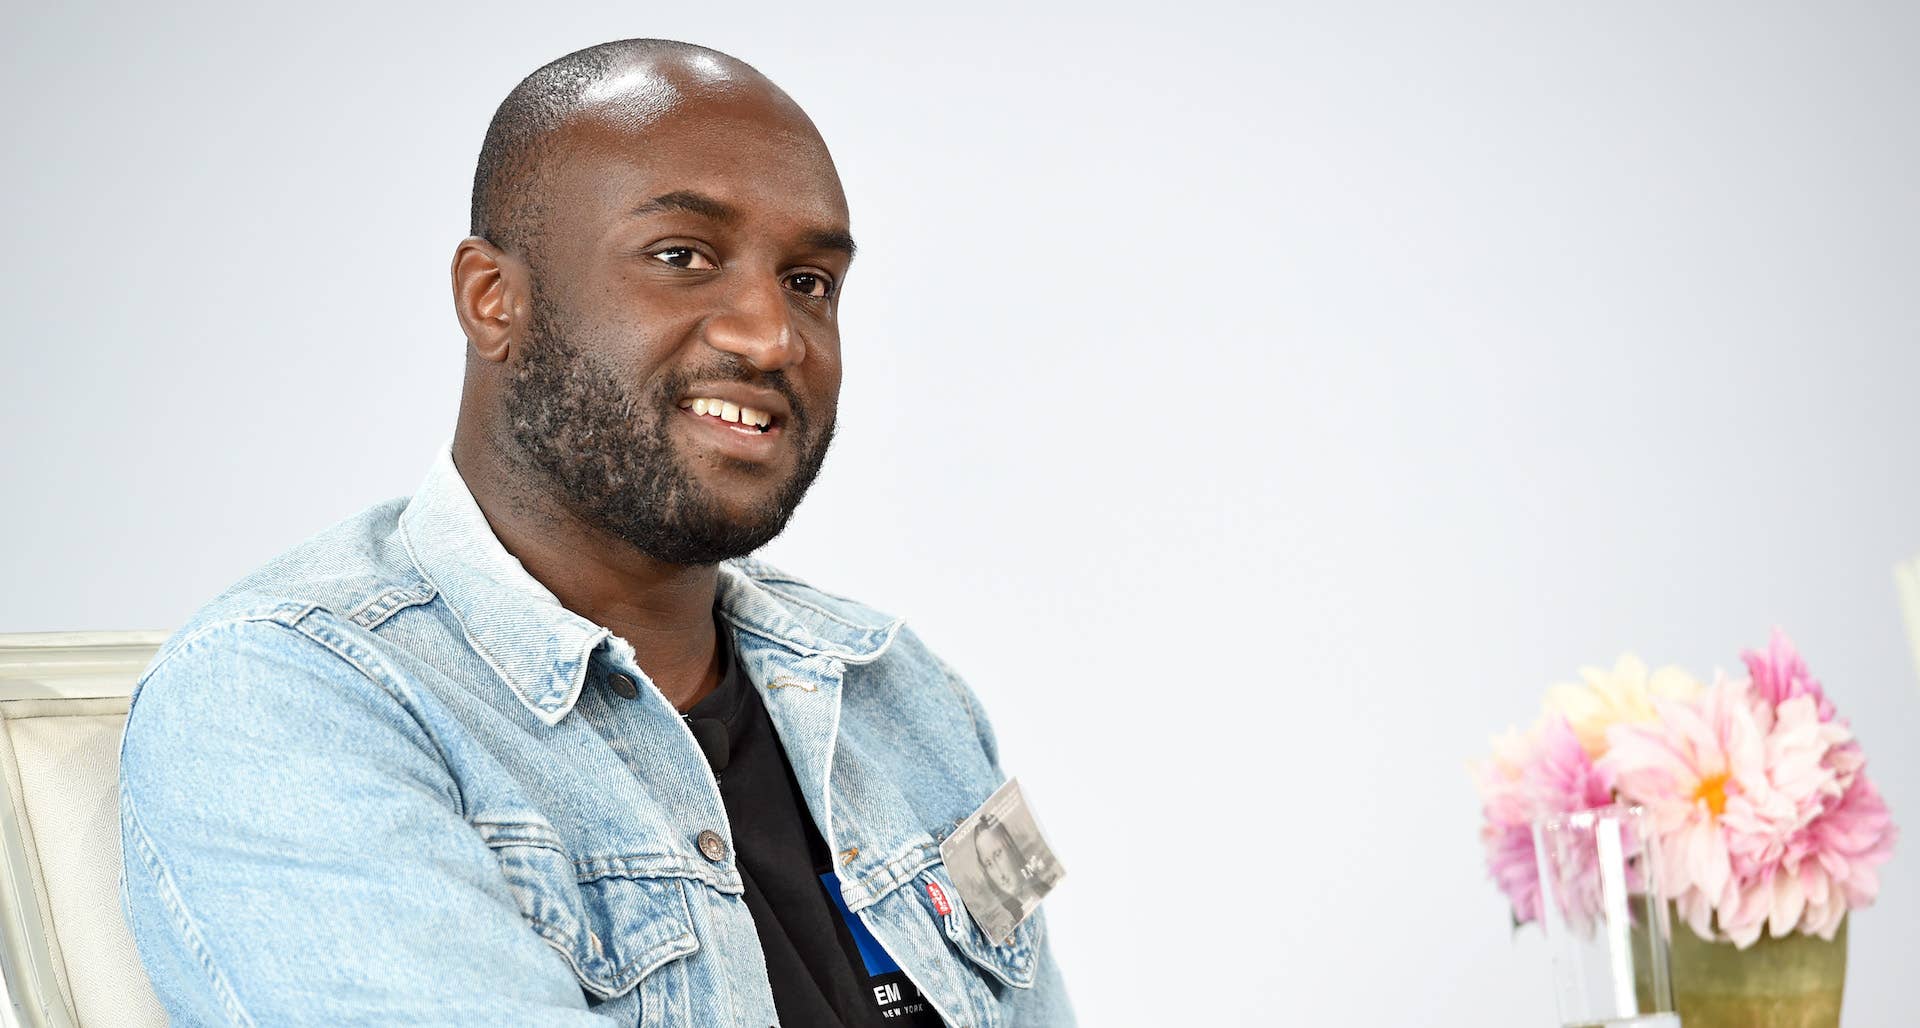 Virgil Abloh speaking at Vogue's Forces of Fashion Conference